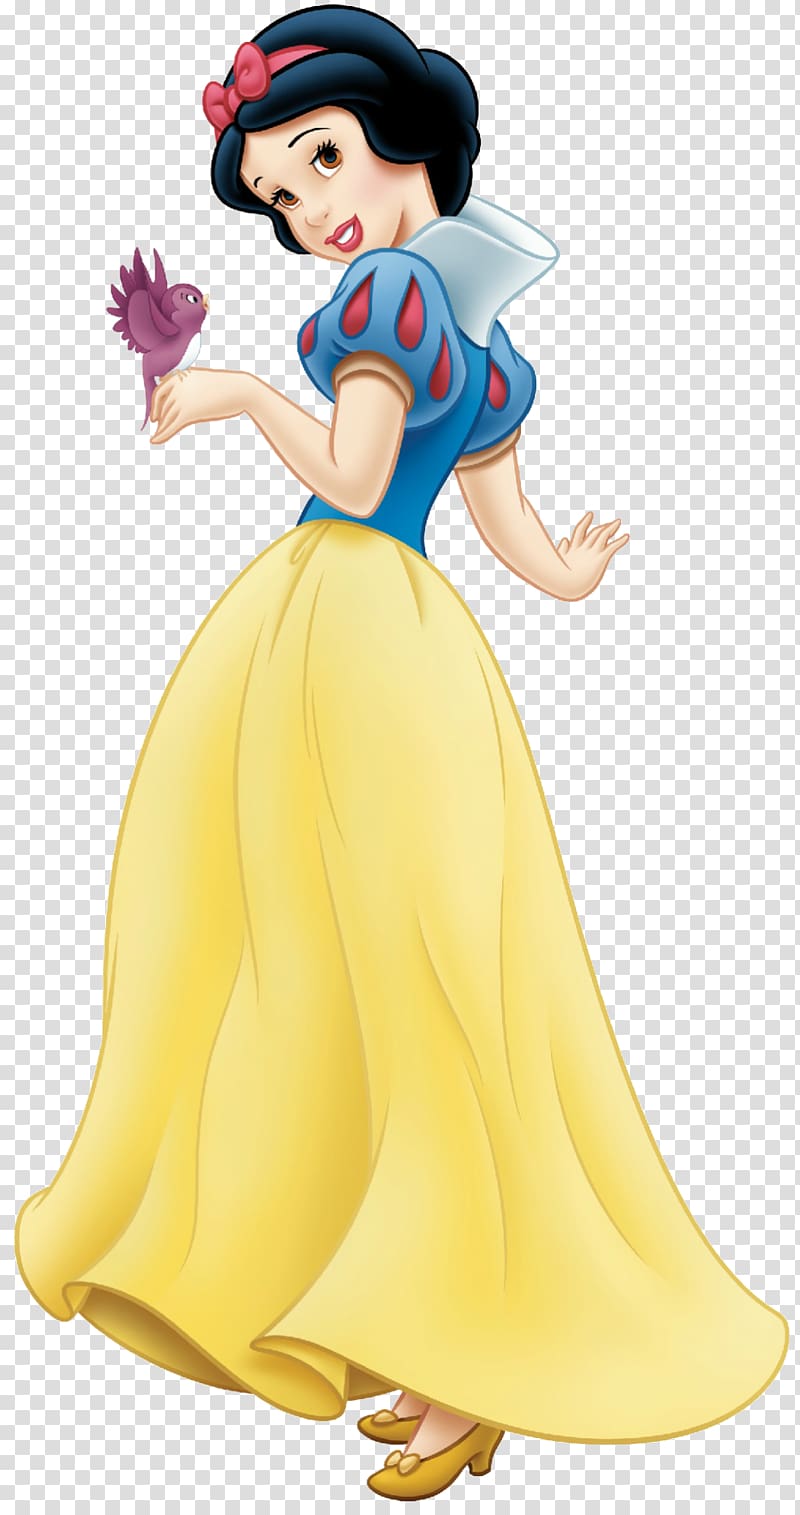 Snow White and the Seven Dwarfs Queen Disney Princess Magic Mirror, snow white and the seven dwarfs transparent background PNG clipart